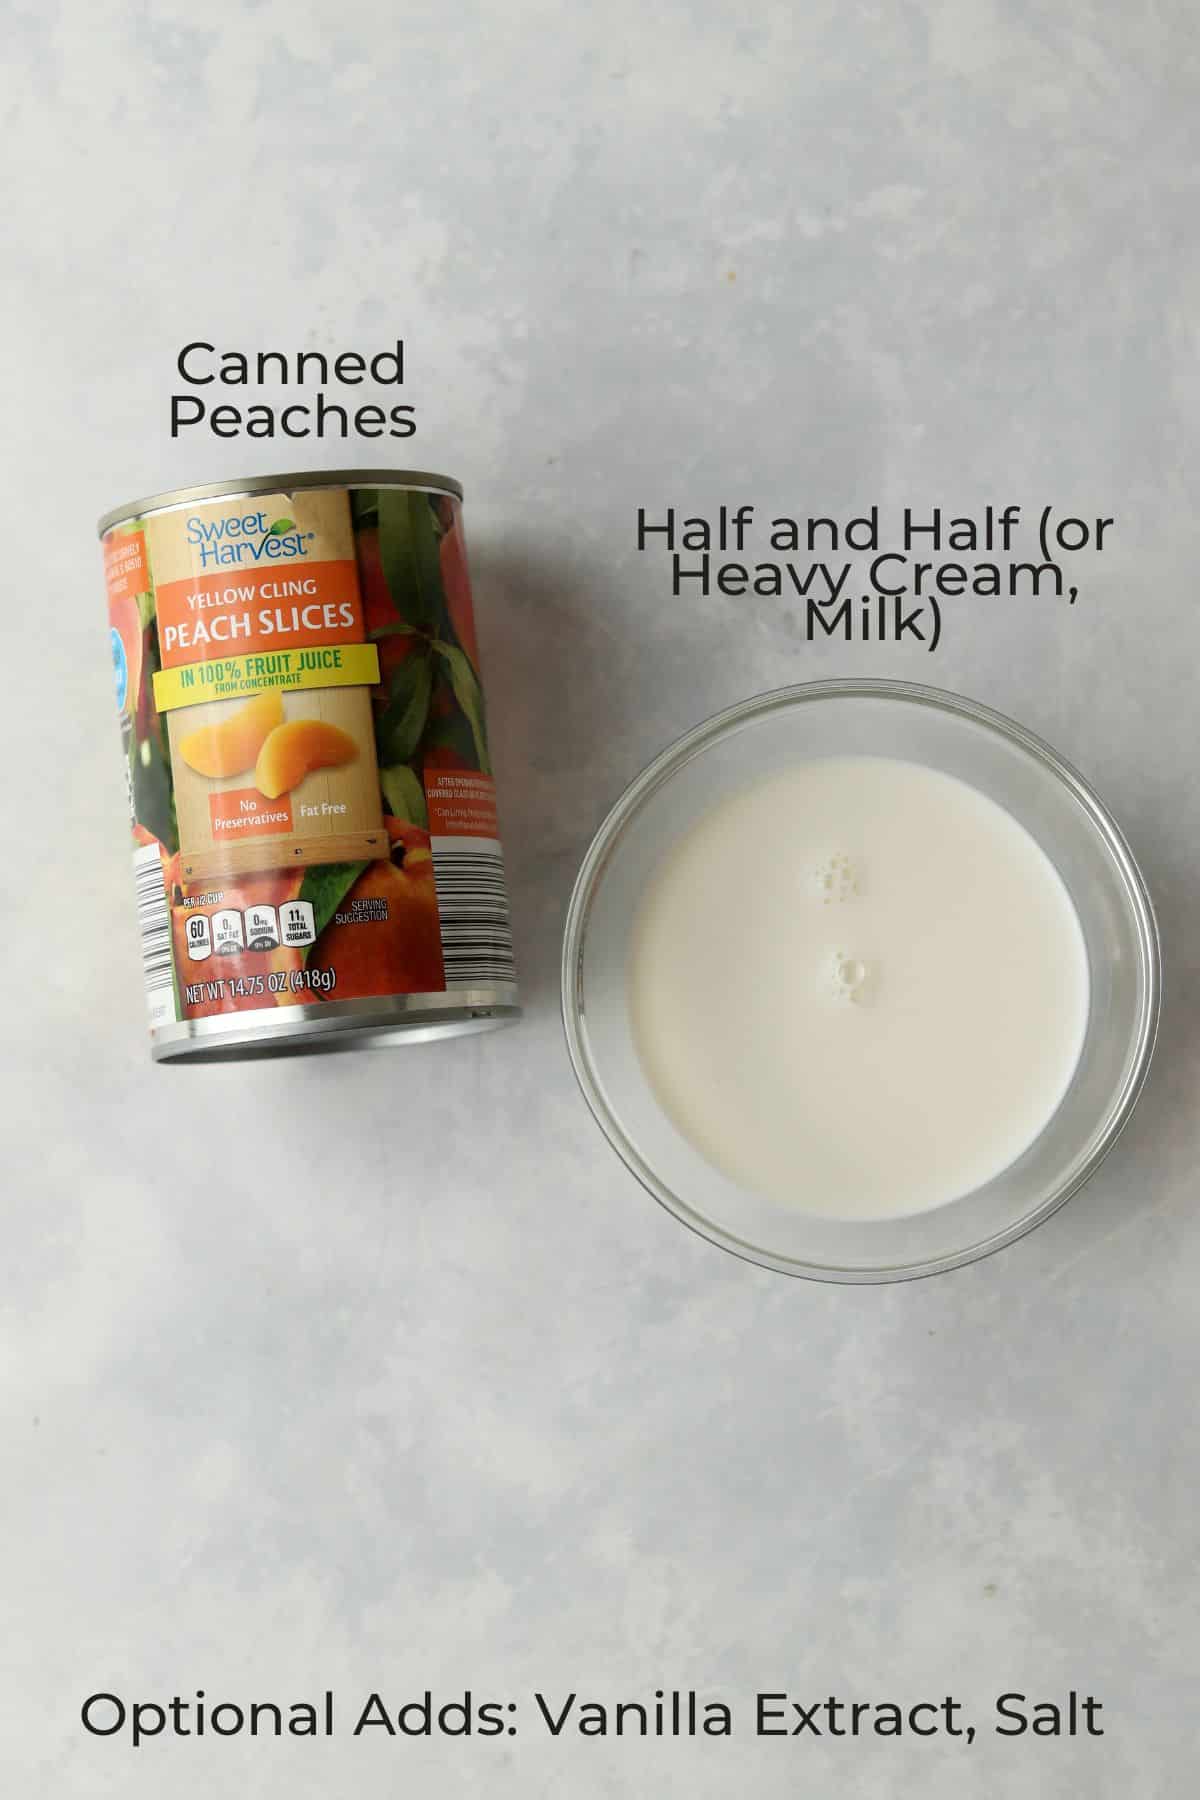 canned peaches and half and half in a small bowl